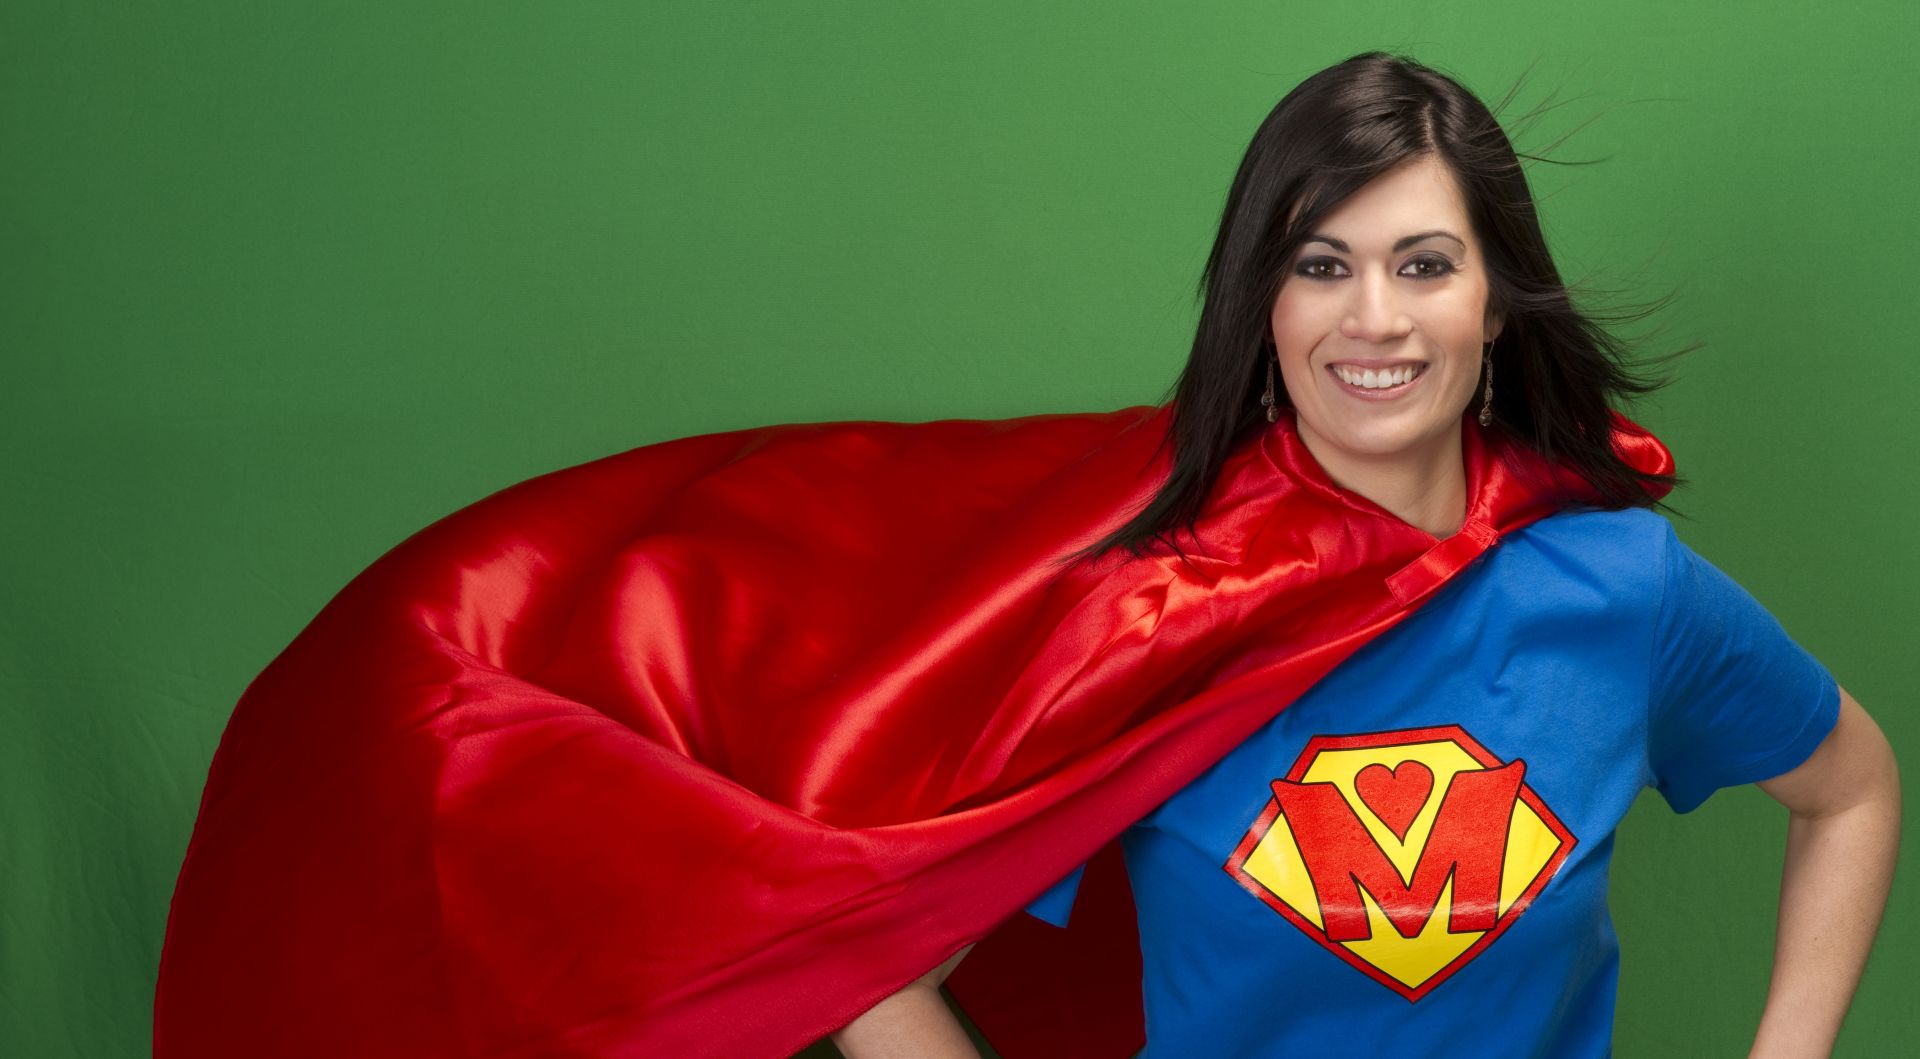 An Open Letter to ‘Super Mom’